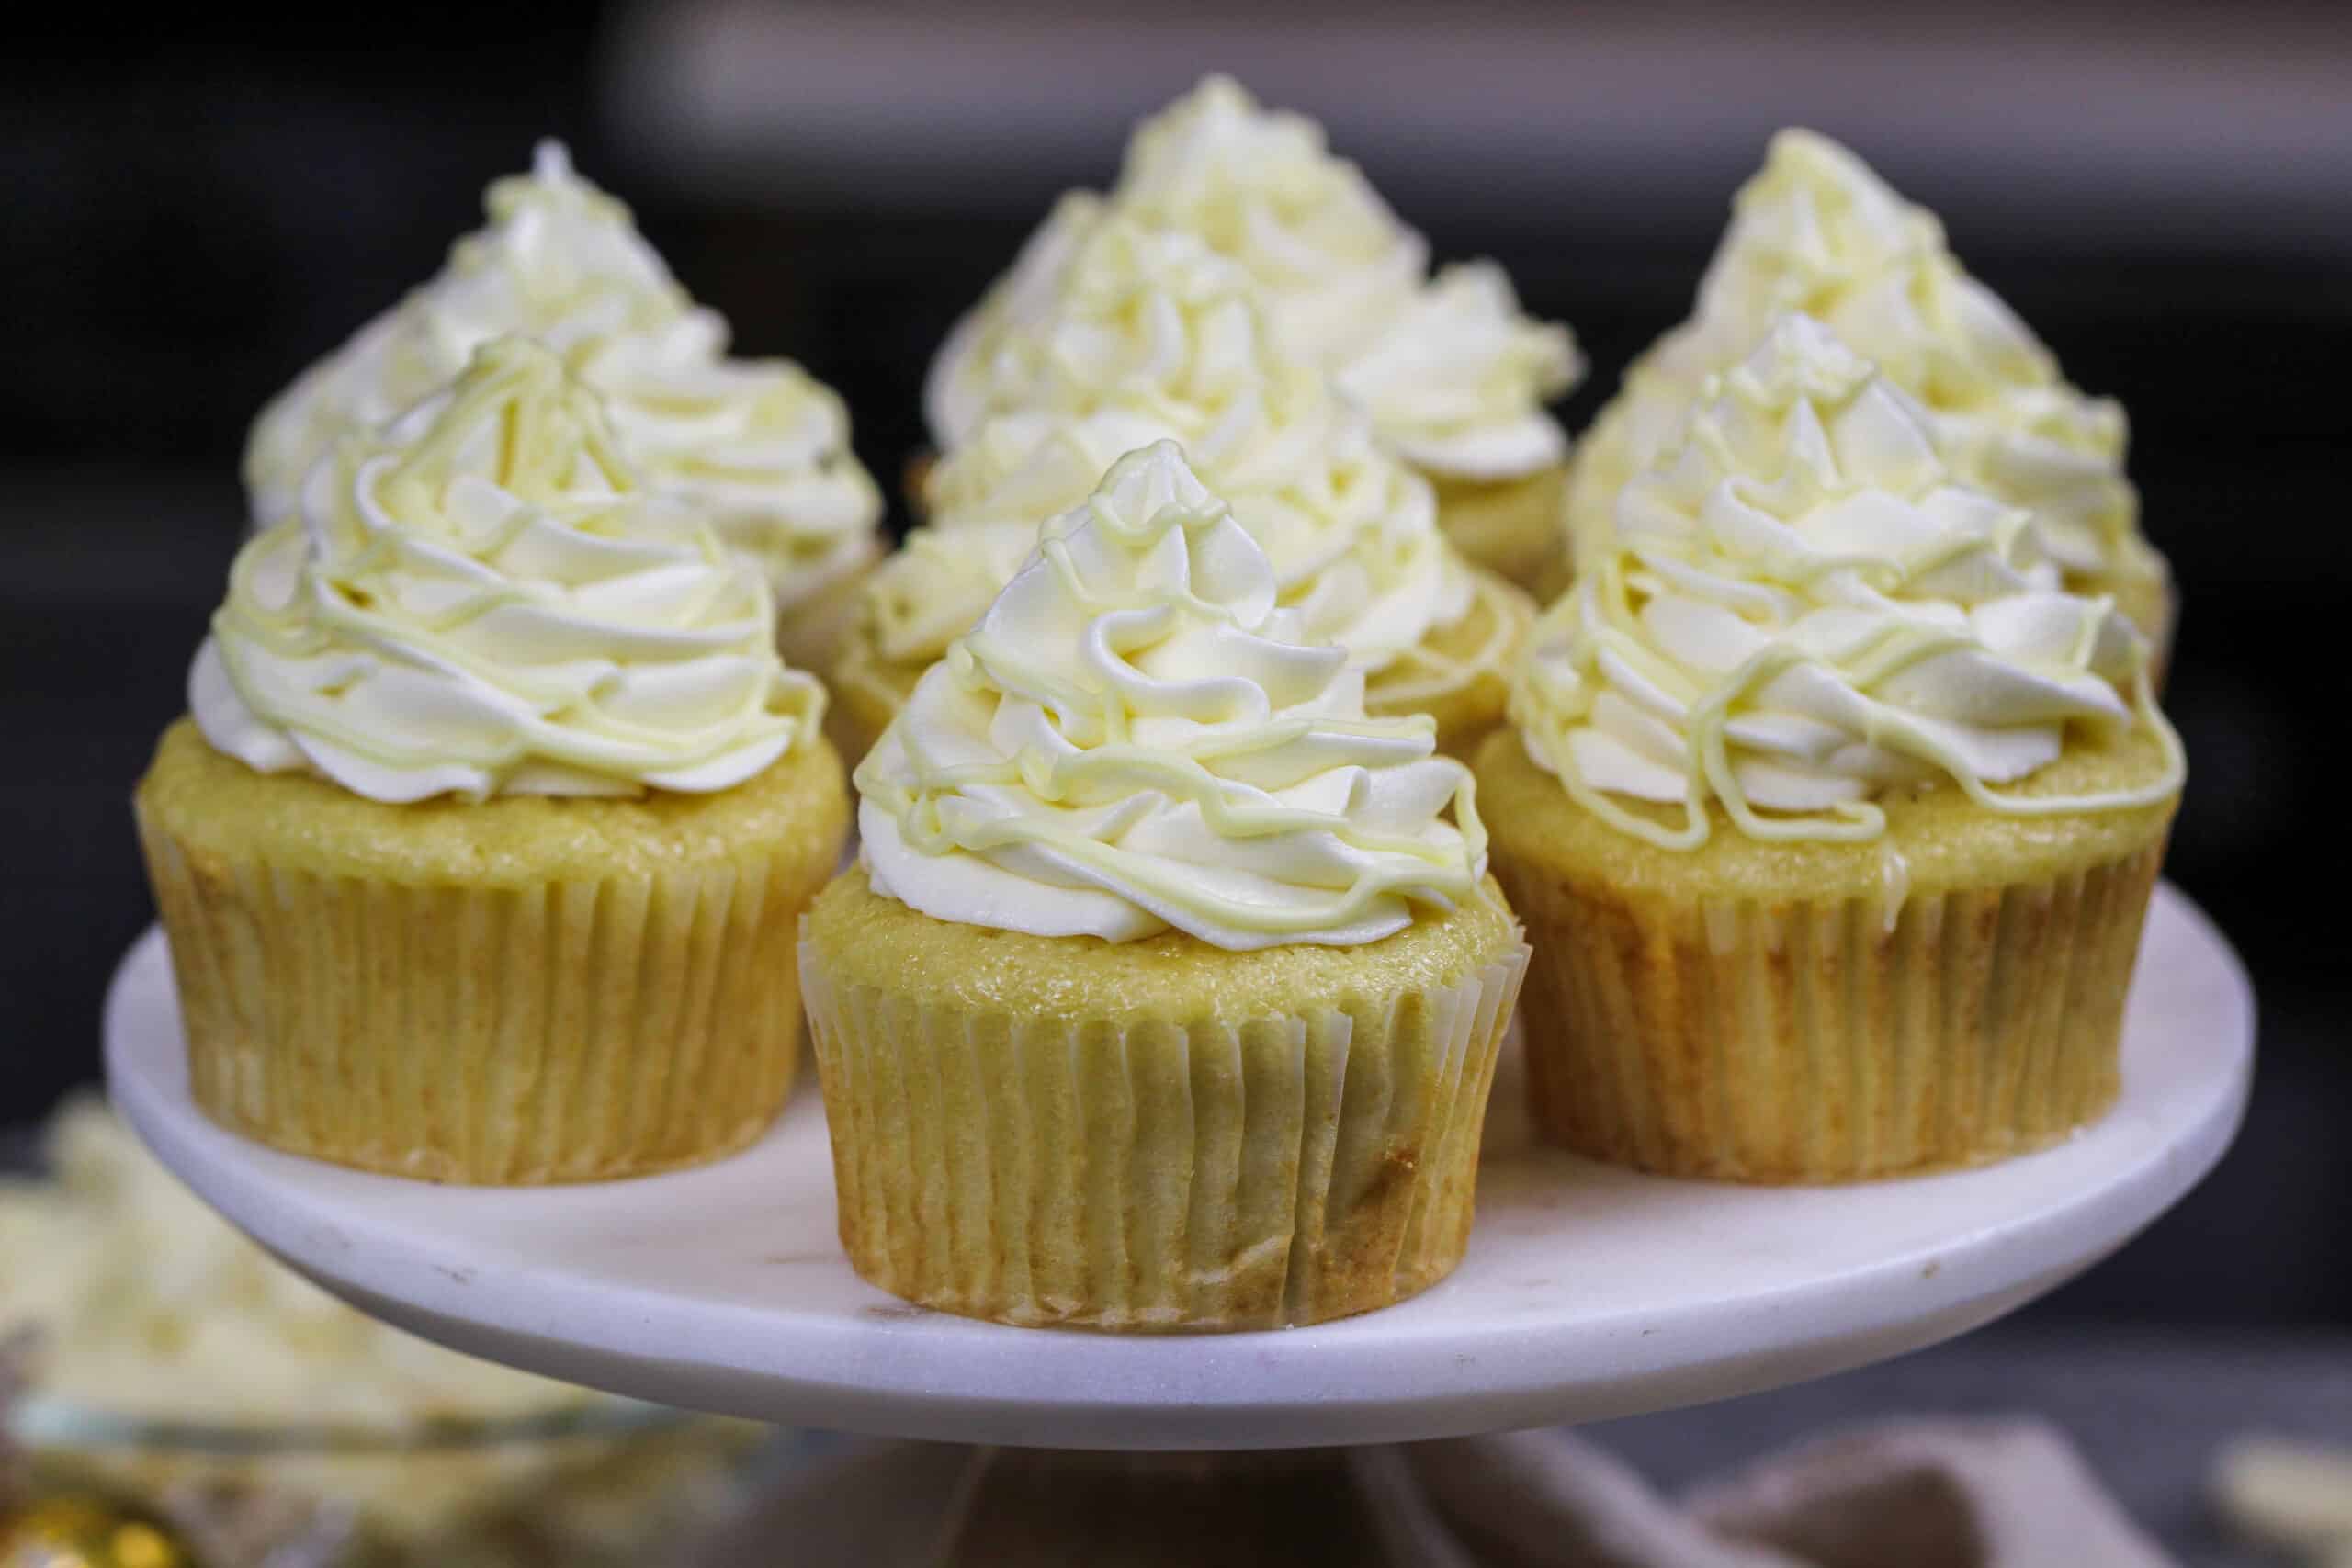 image of white chocolate cupcakes that have been filled with white chocolate ganache and frosted with a fluffy white chocolate buttercream